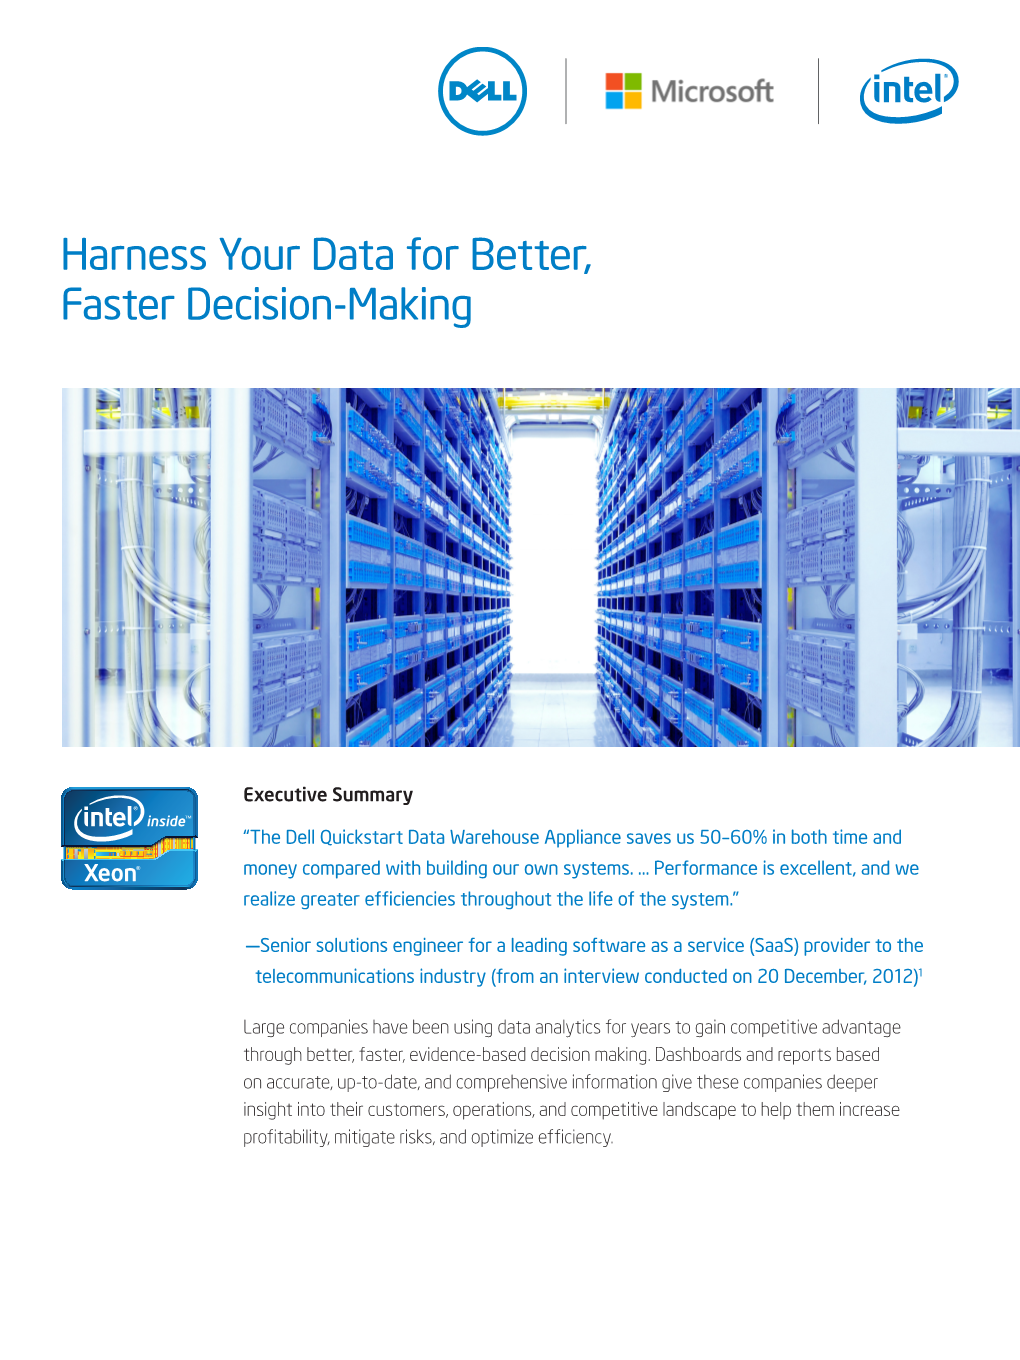 Harness Your Data for Better, Faster Decision-Making